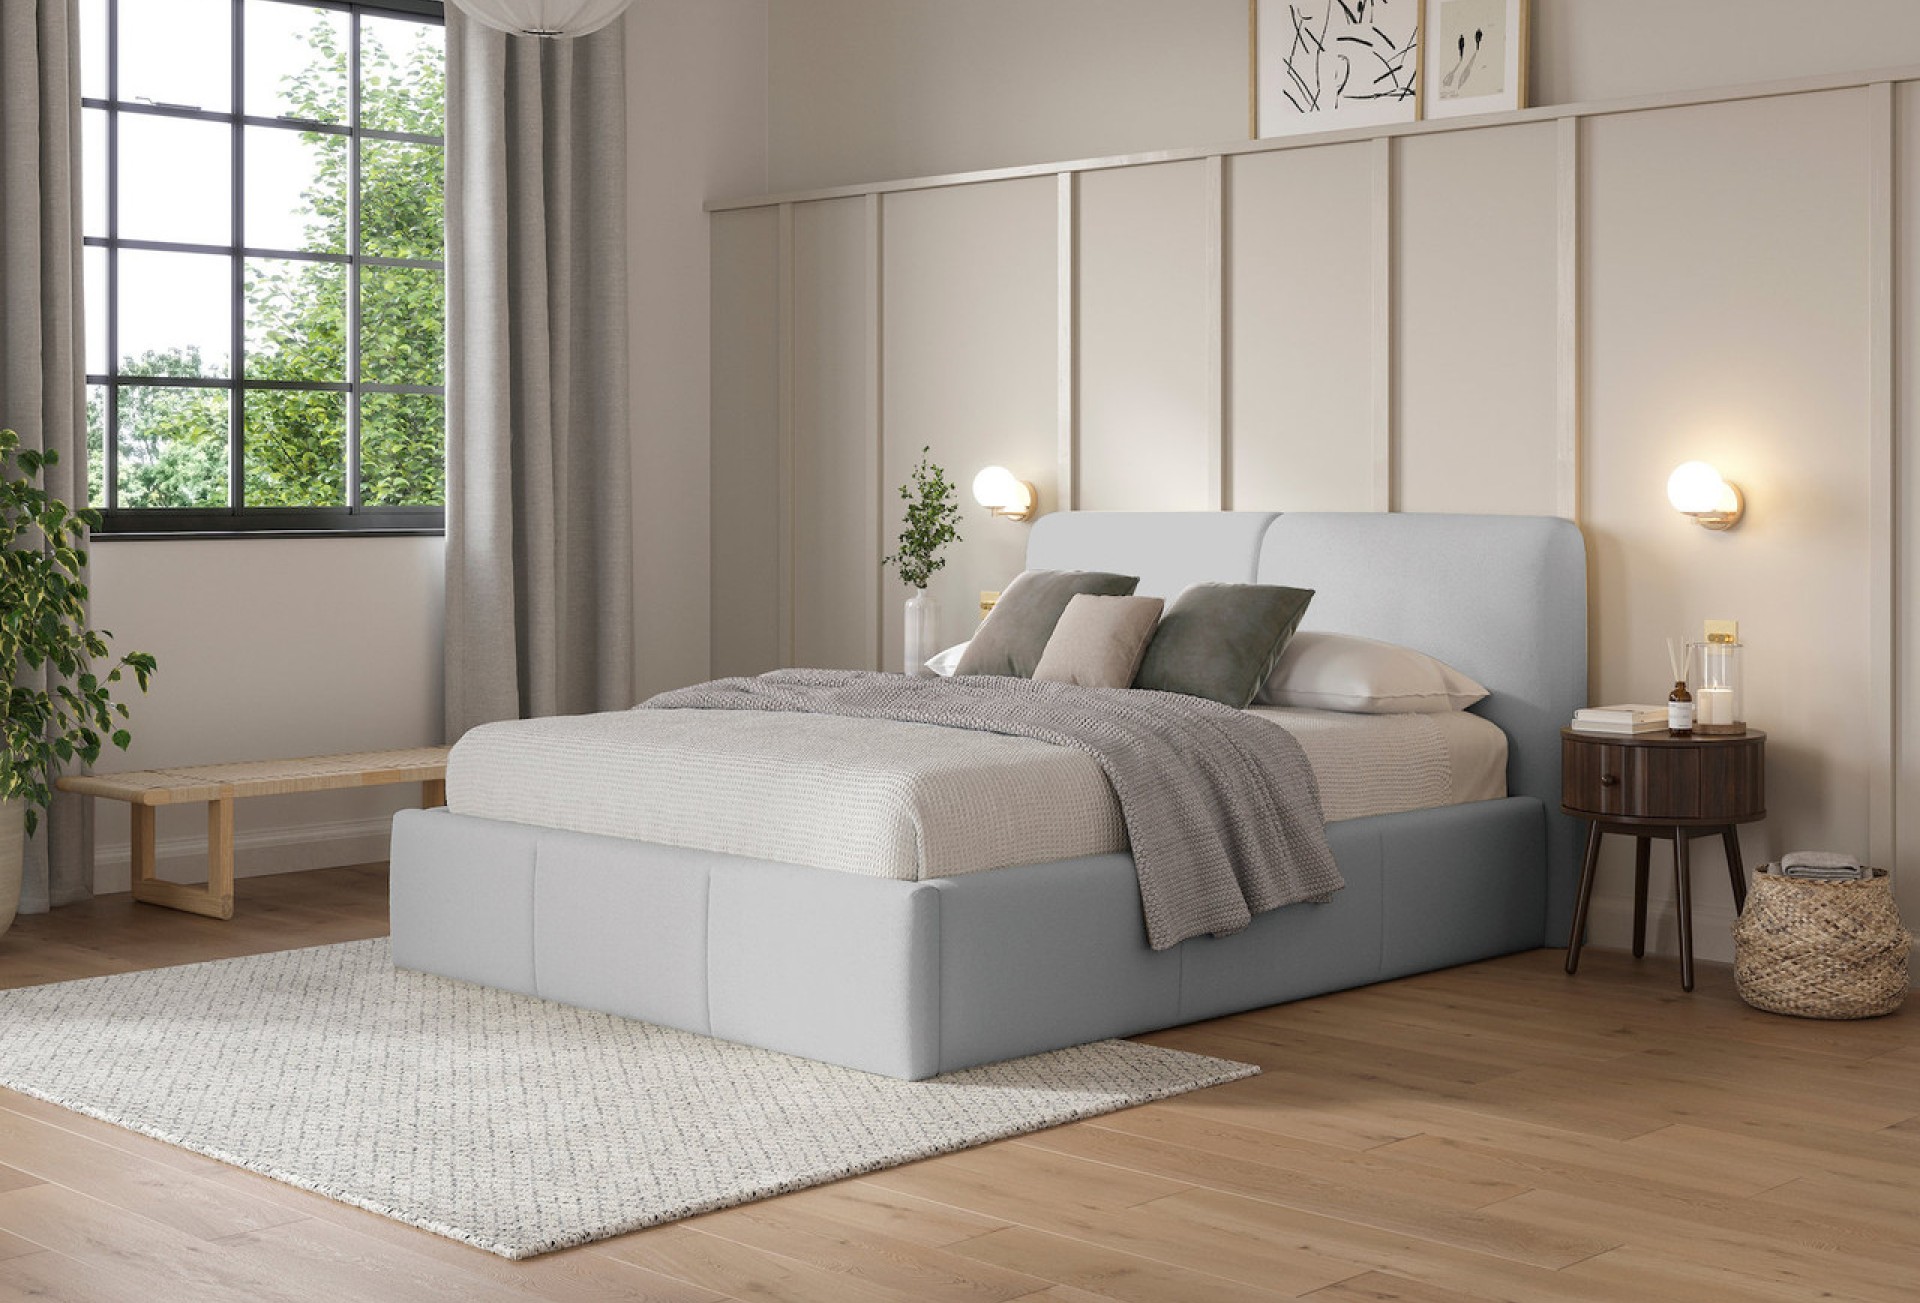 Claudia ottoman bed frame in ivory boucle set in a modern minimalist bedroom